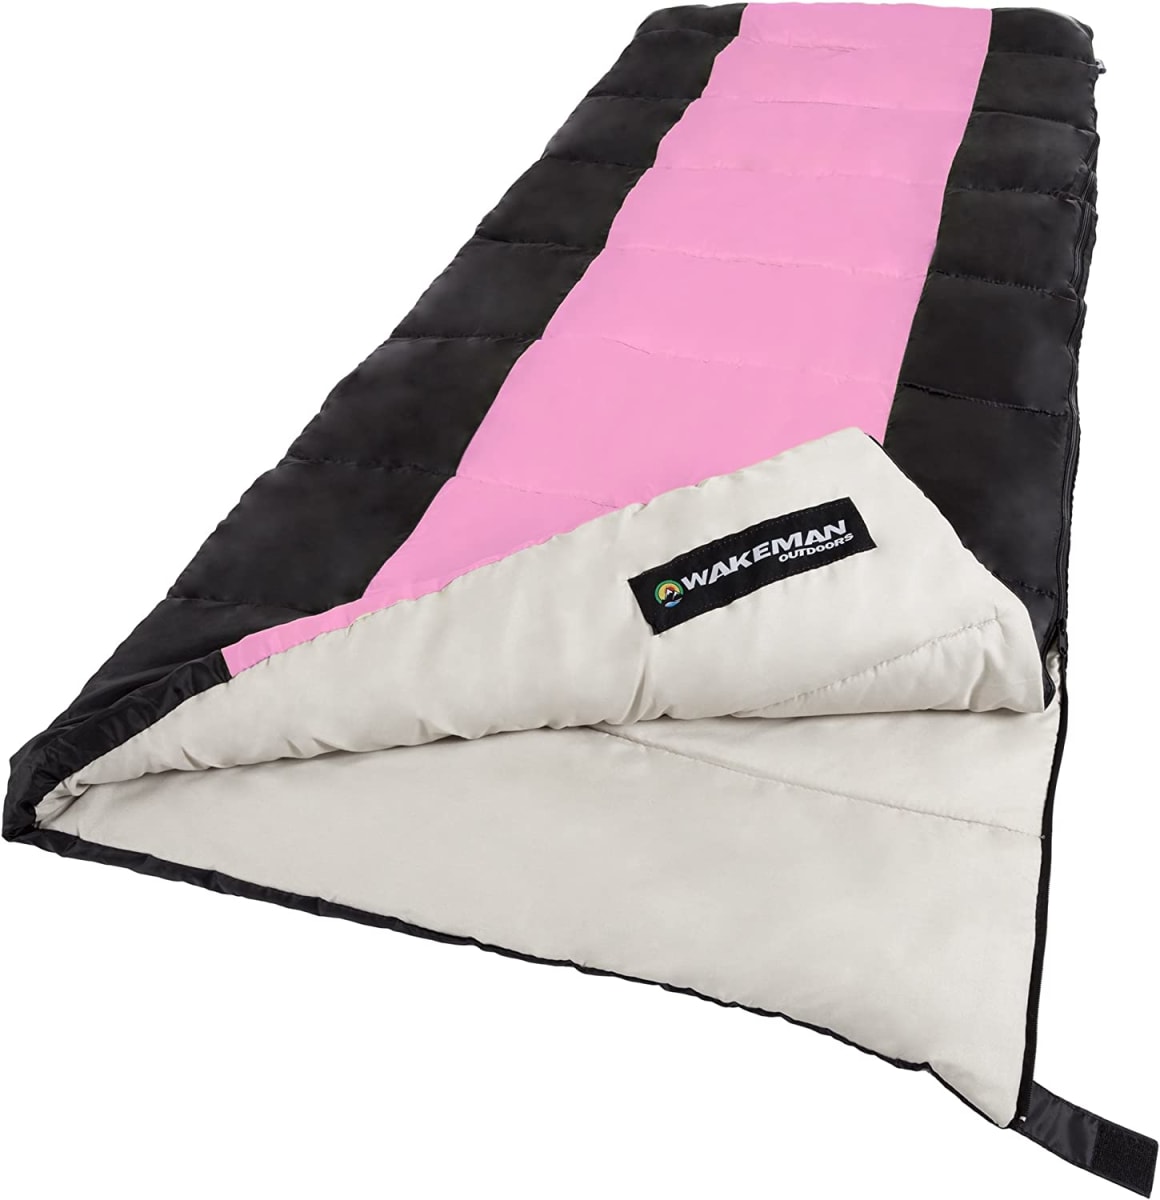 Outdoors Sleeping Bag-Lightweight, Carrying Bag with Compression Straps Included-Great for Adults